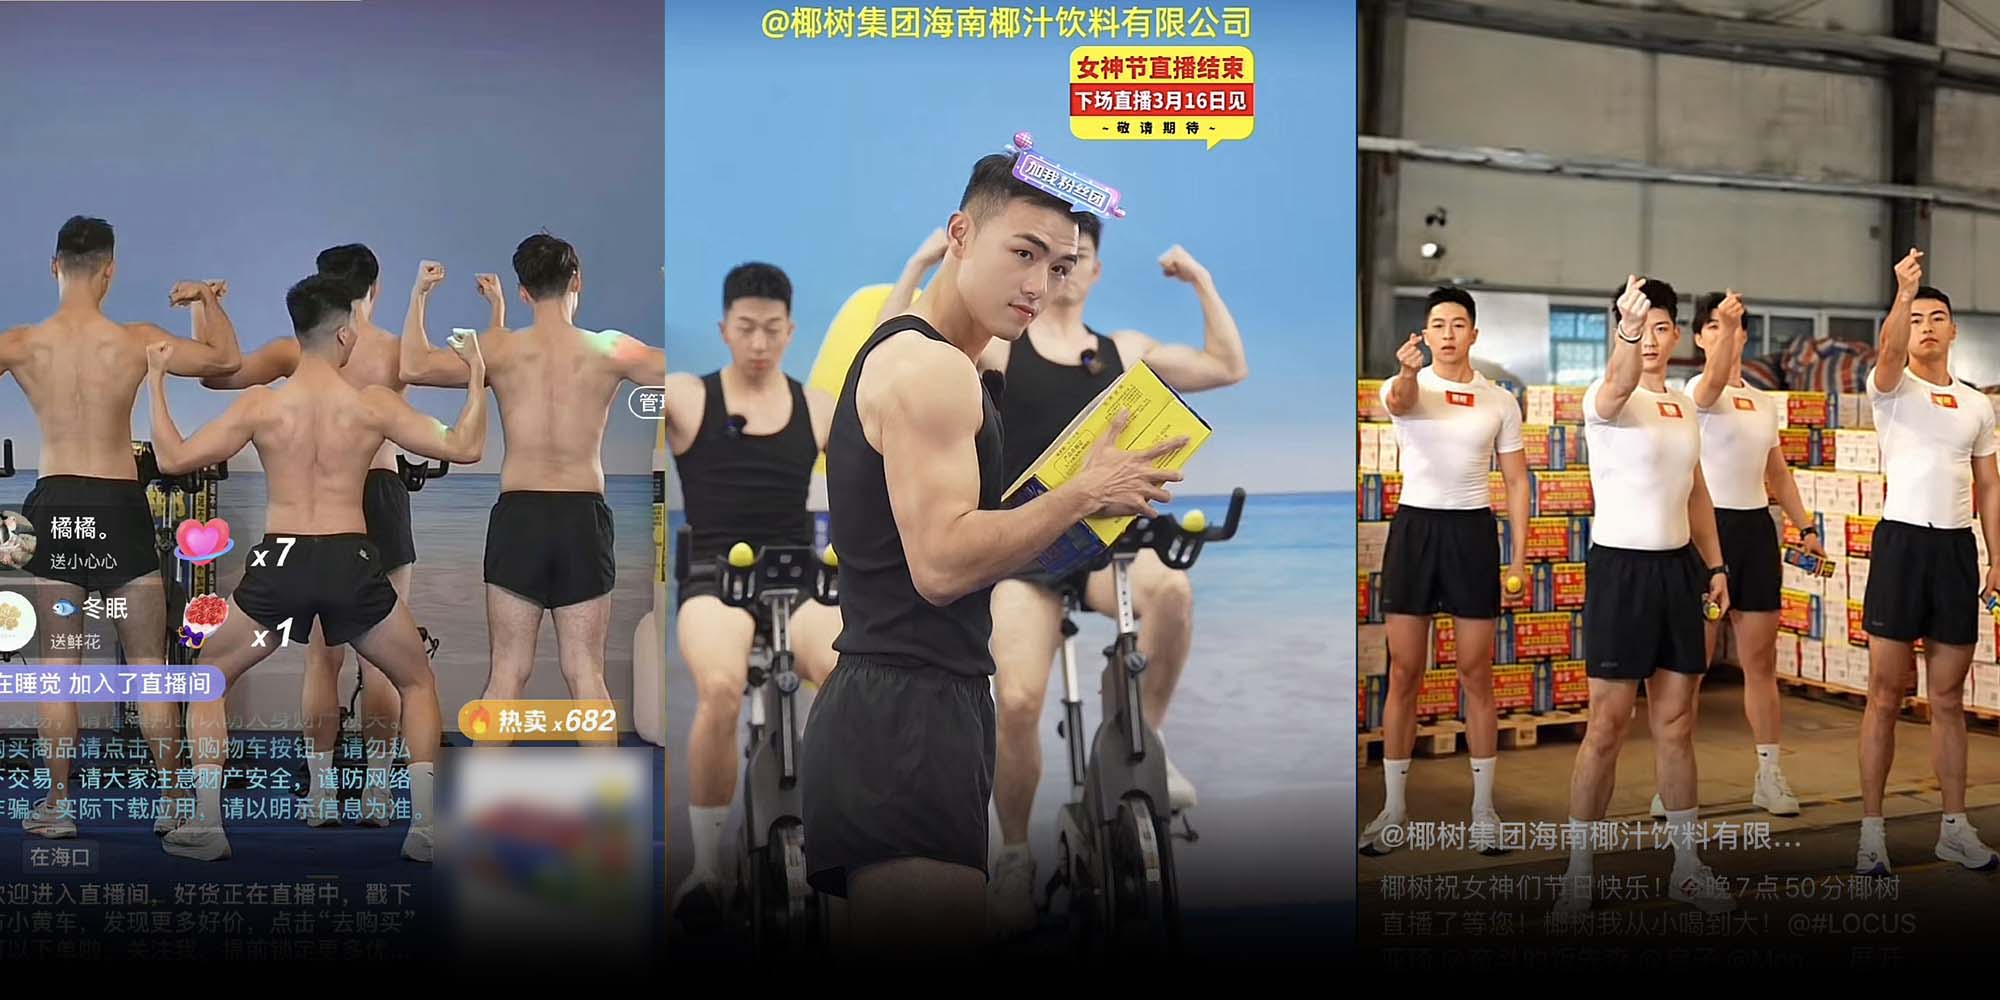 Chinese Coconut Drink Known for Sexist Ads Turns Its Gaze to Men thumbnail